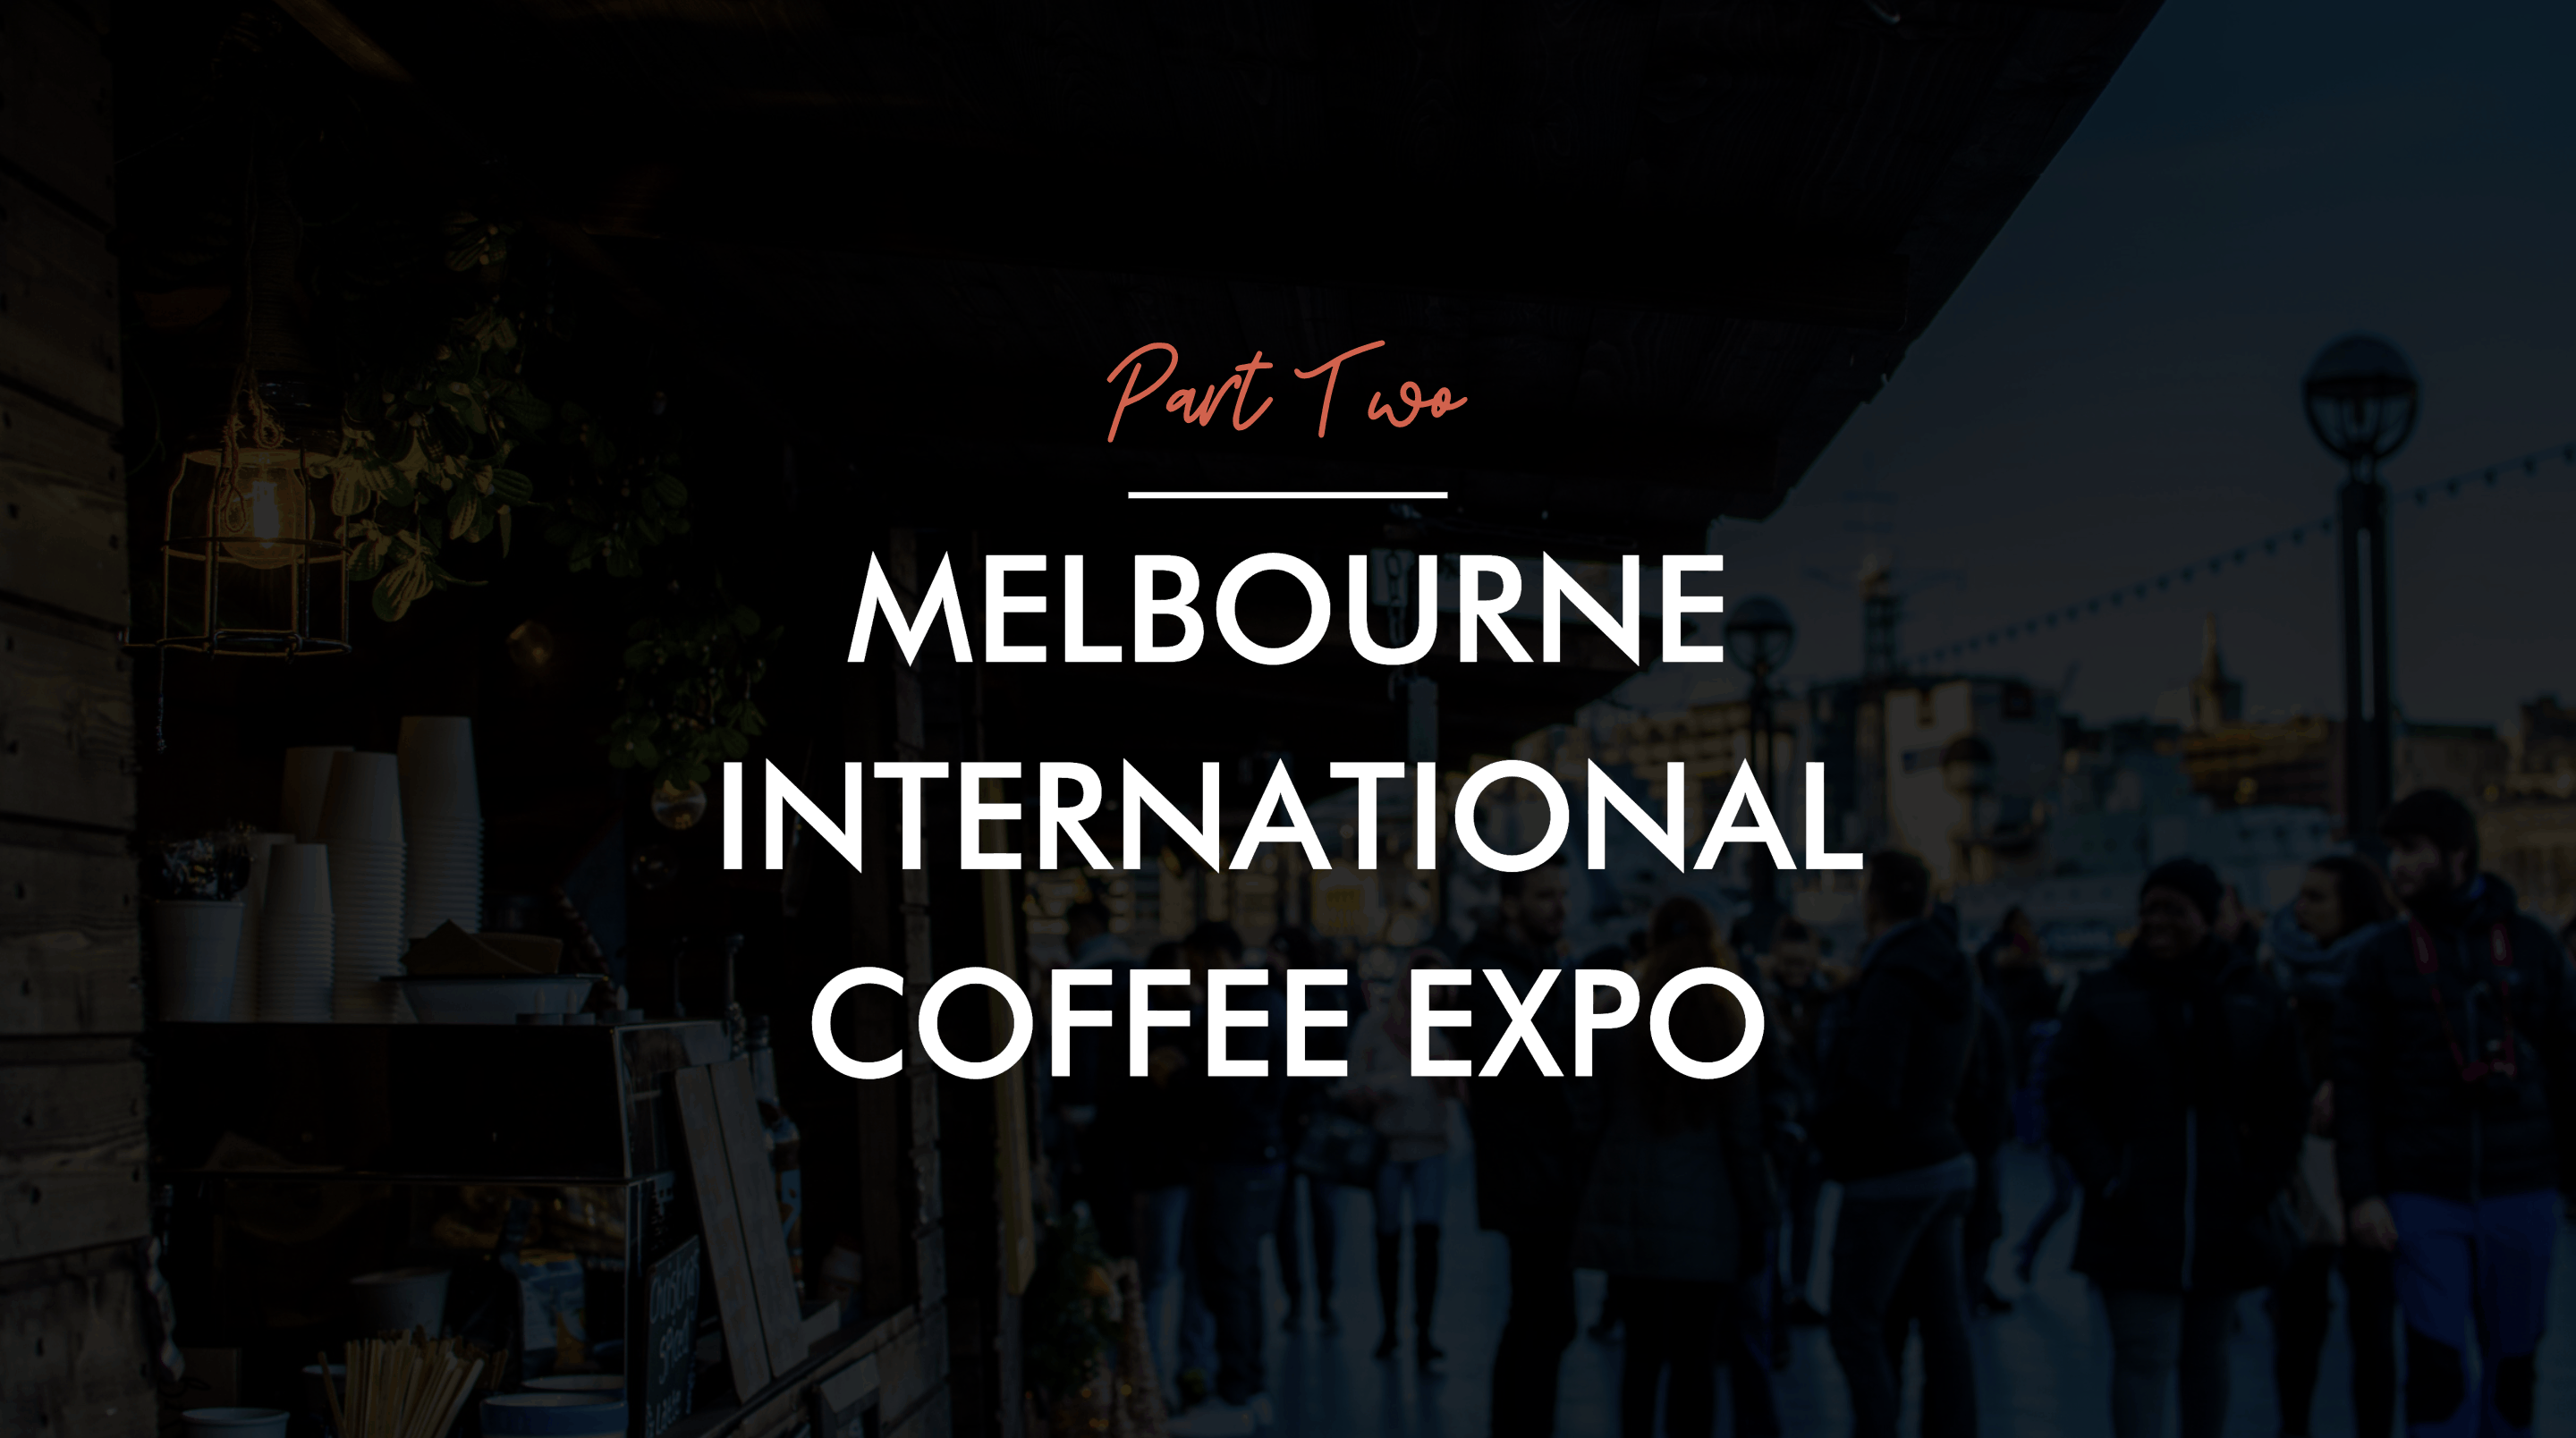 Melbourne International Coffee Expo 2019 Part 2